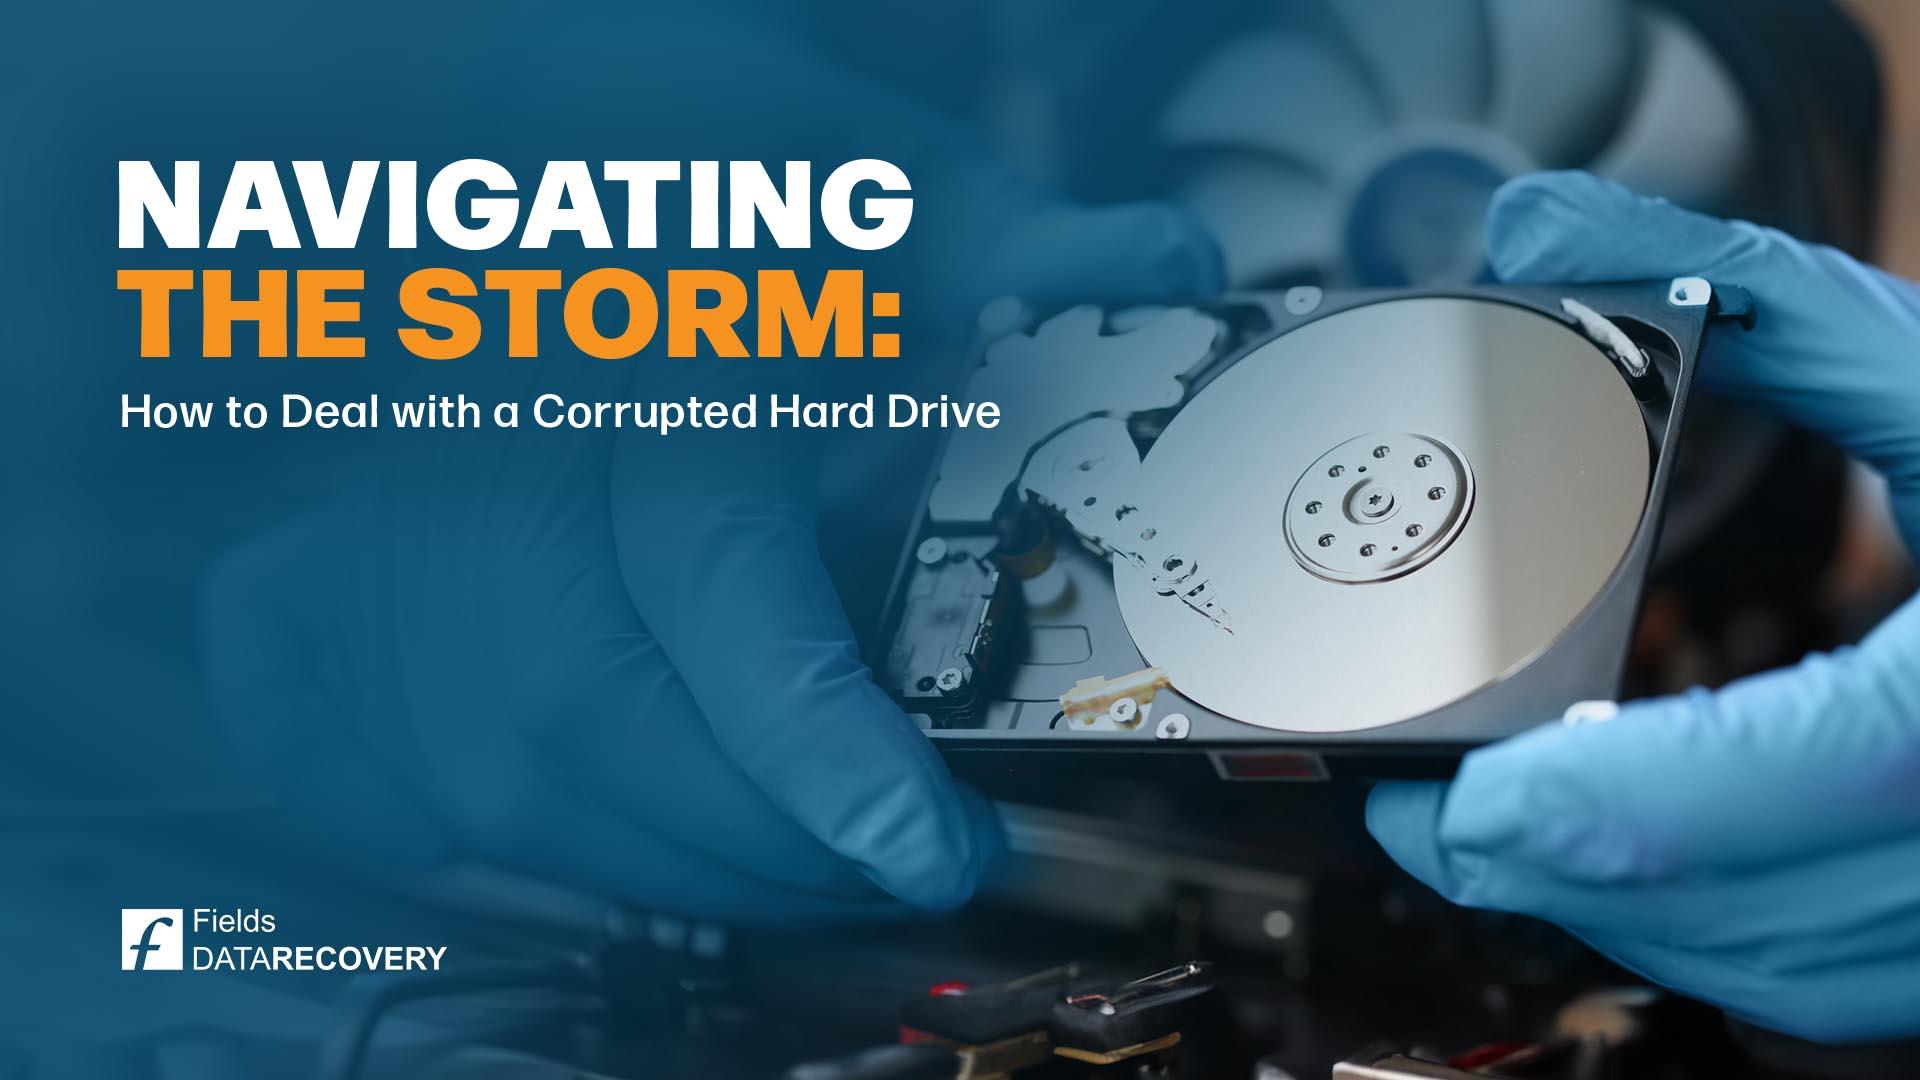 Navigating the Storm: How to Deal with a Corrupted Hard Drive